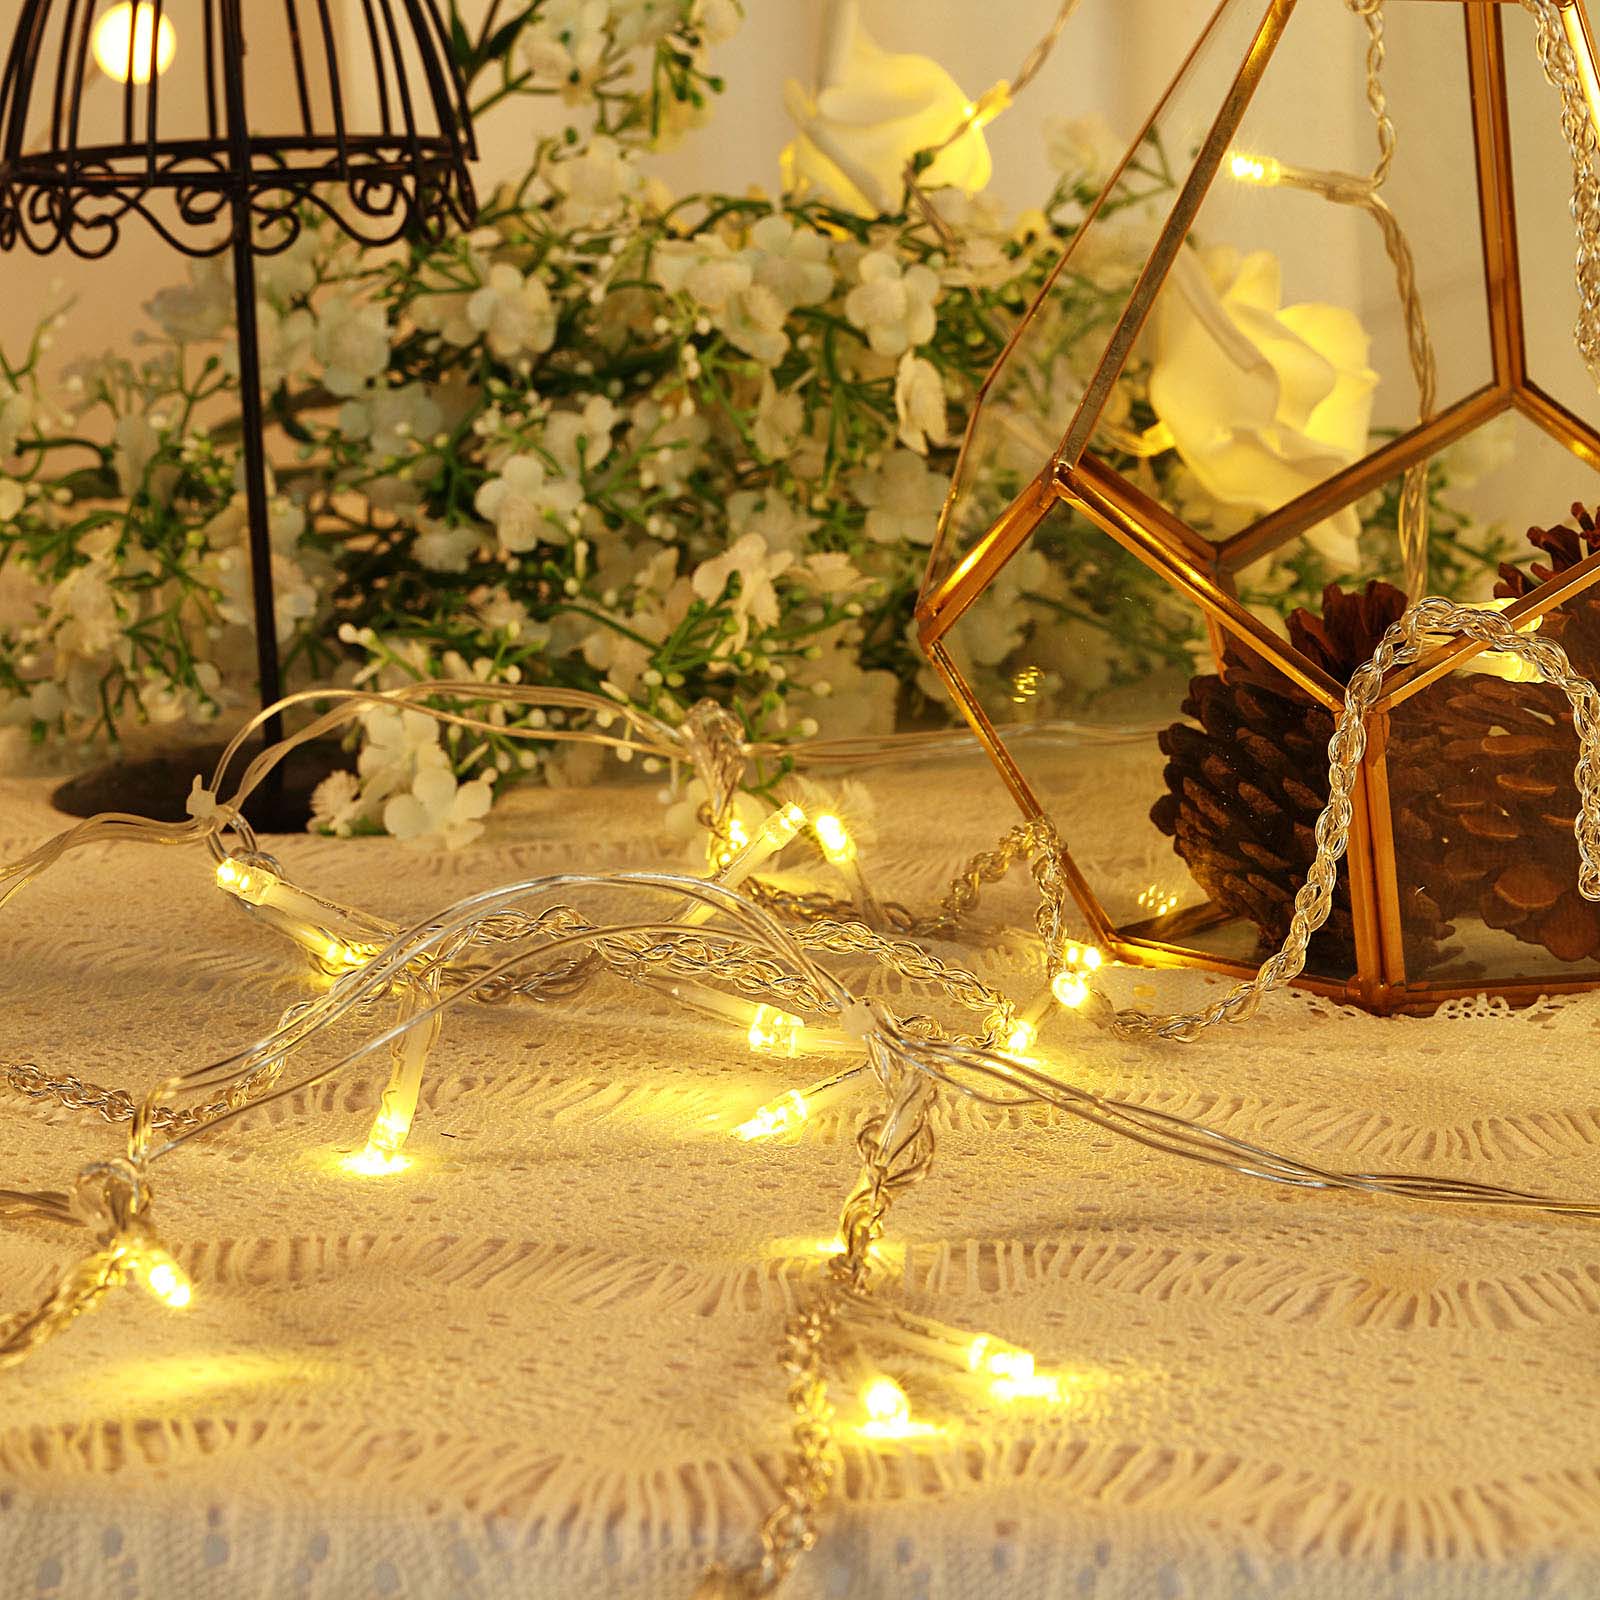 60x36 in Warm White LED Battery Operated Fairy Lights Backdrop Garland